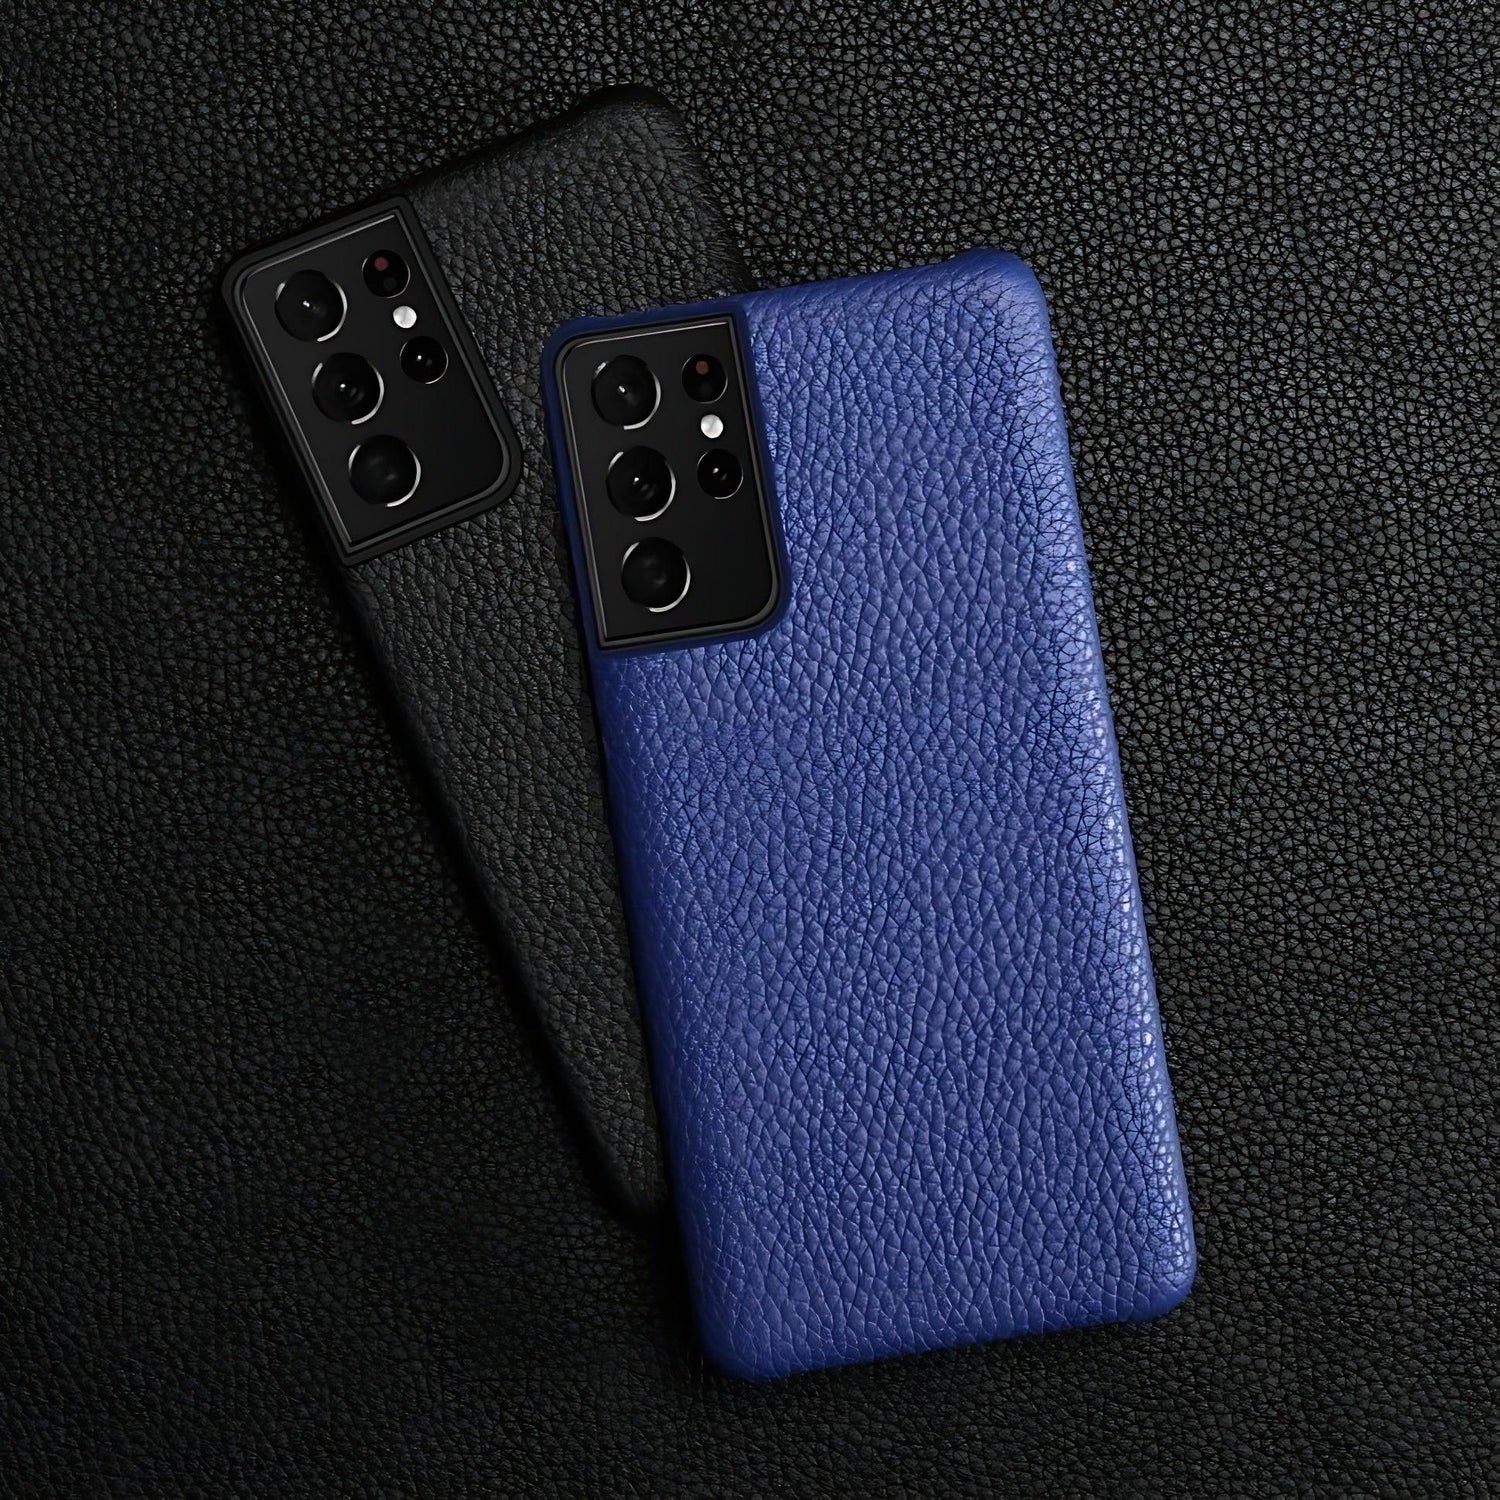 Cute Galaxy S10E Cases - Touchy Style .